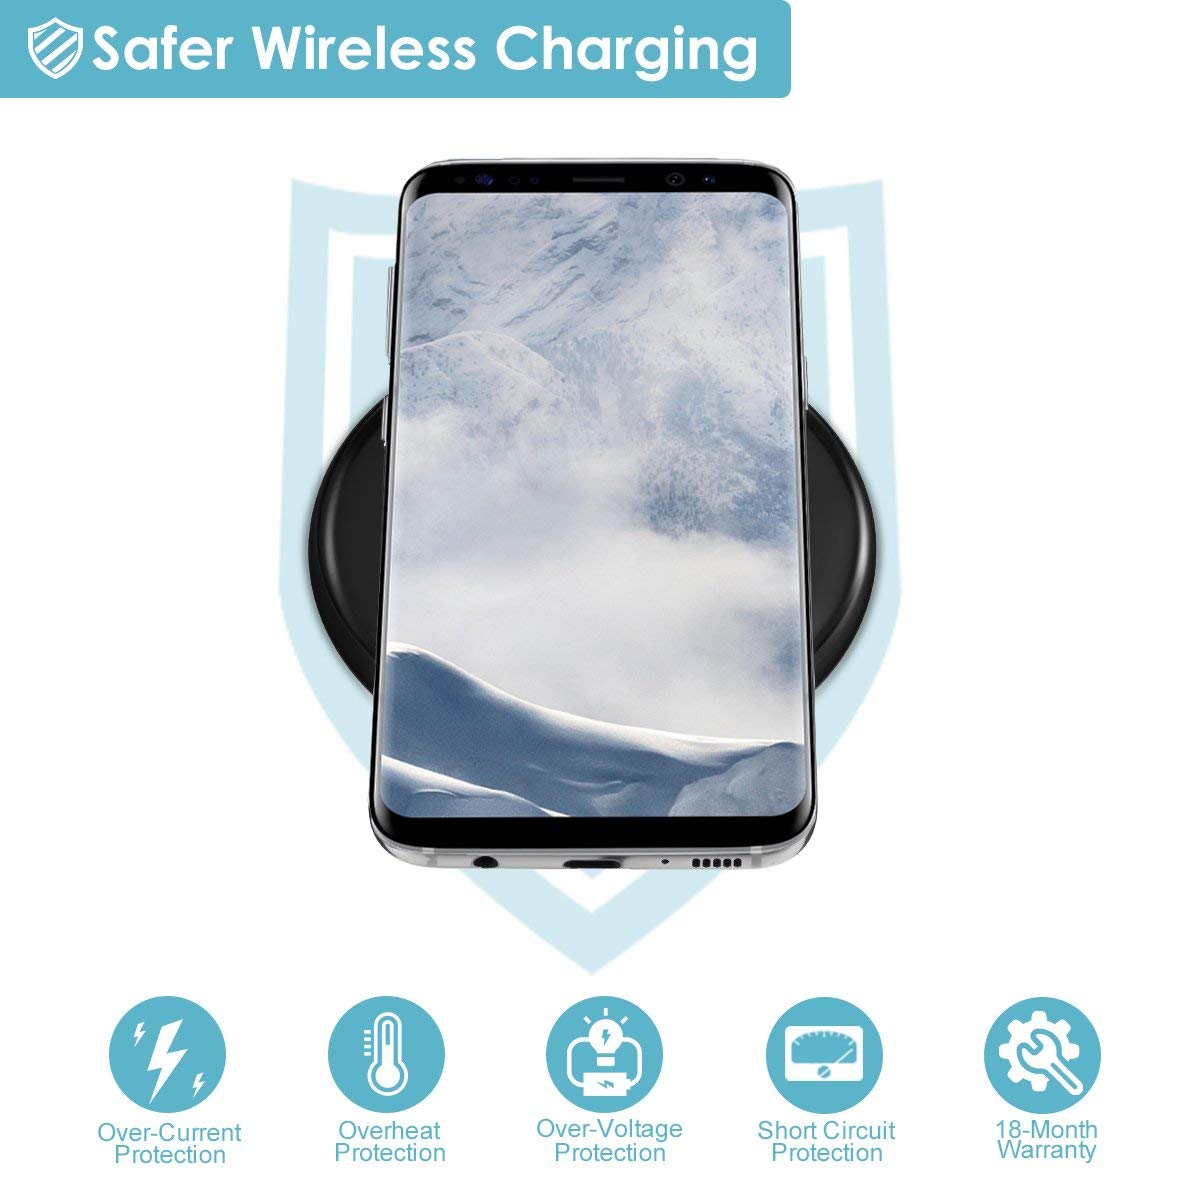 Will Charge Up To 1.5X Faster Than Other Wireless Chargers By Using A Qc2.0 &Amp; Qc3.0 Charger Adapter (Not Included). Supports Input 5V/2A, Output 5V/1A(Max). 5W Output Is Available Compatible Samsung S9, S9 Plus, Iphone X, 8, 8 Plus (Also Enable The Latest Ios 11 Update). Provides Higher Efficiency And Saves Time, No Charge Cables Needed. 